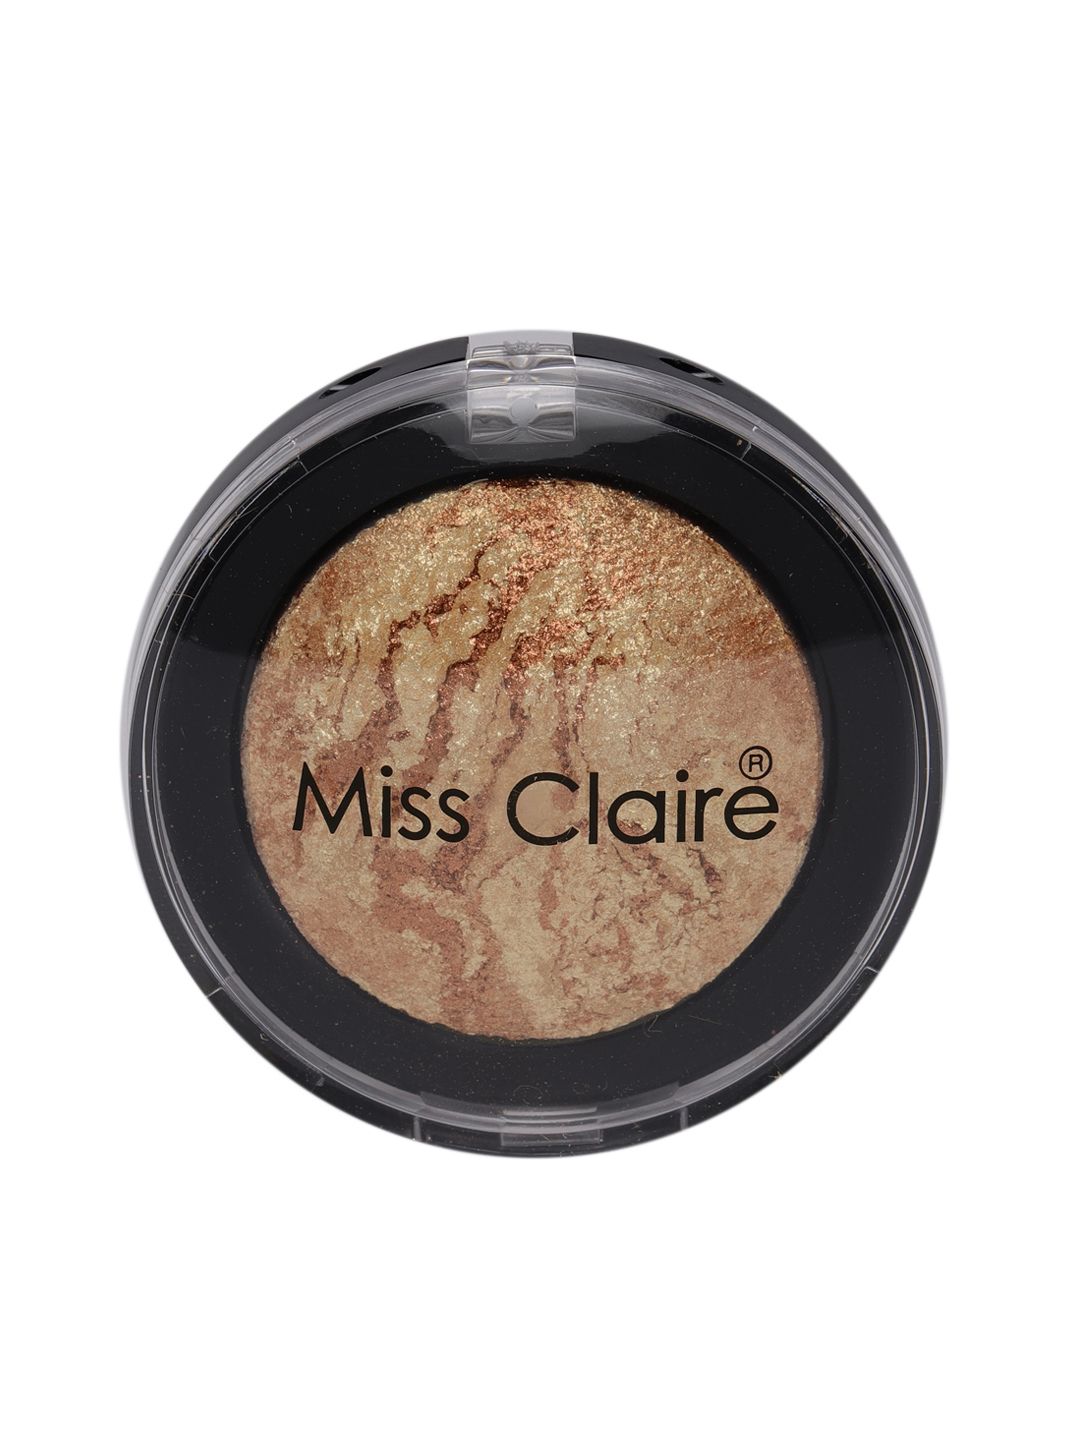 Miss Claire 08 Baked Duo Eyeshadow Price in India